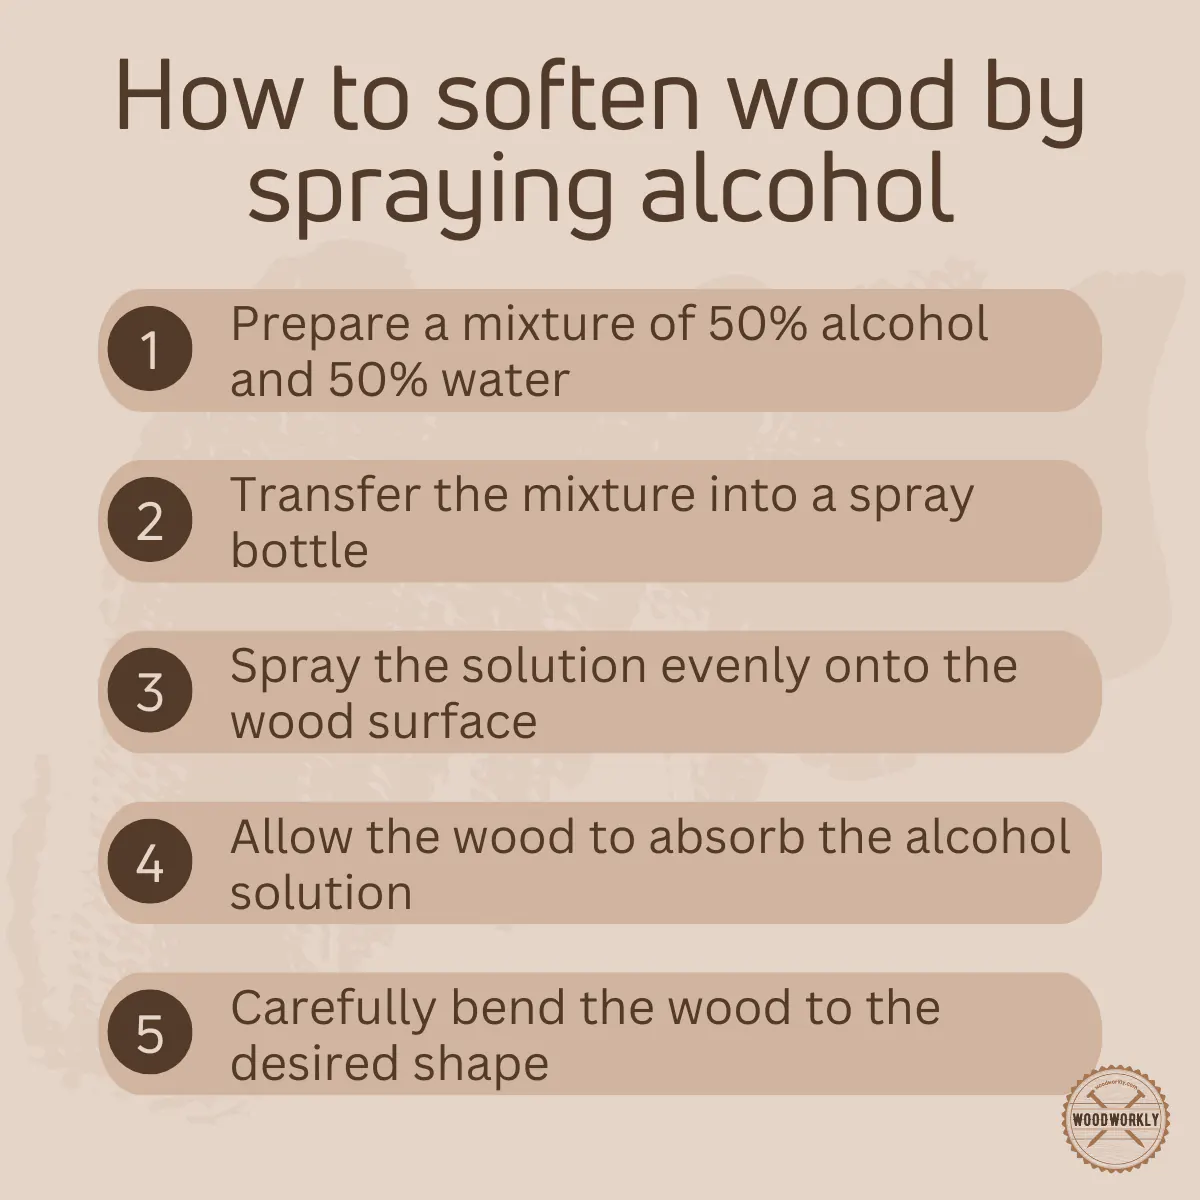 How to soften wood by spraying alcohol